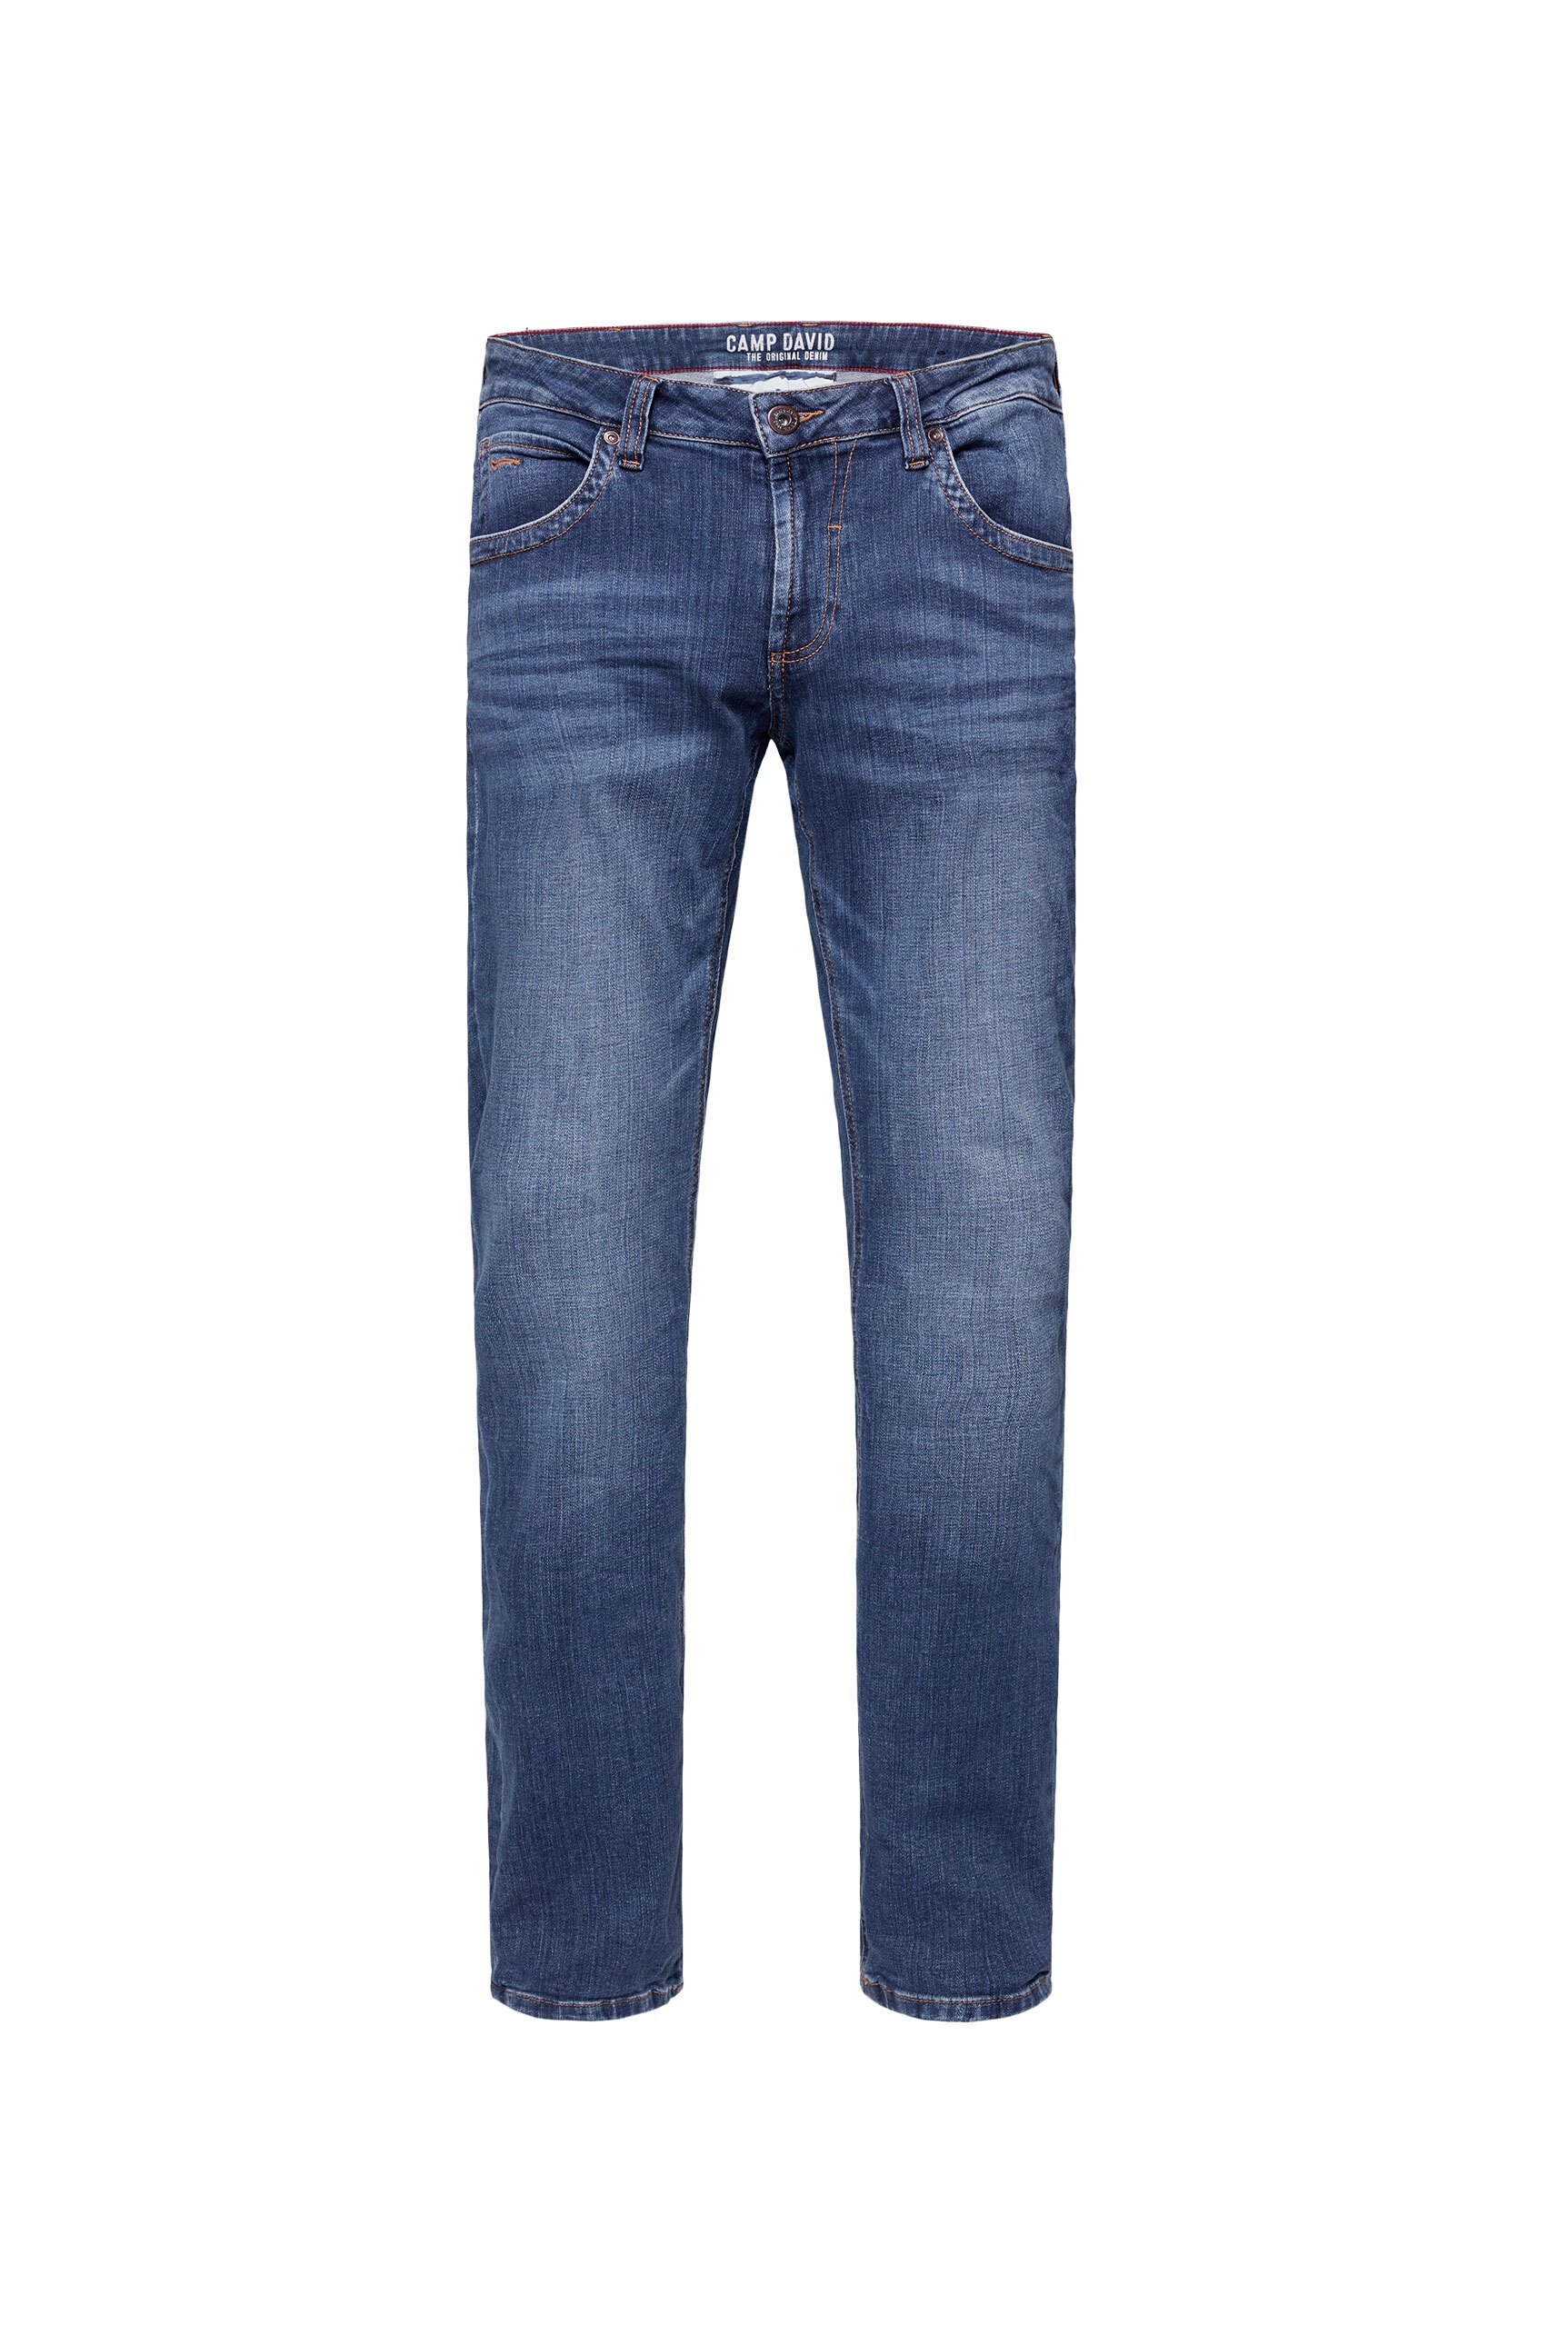 CAMP DAVID Regular-fit-Jeans, mit Used-Waschung